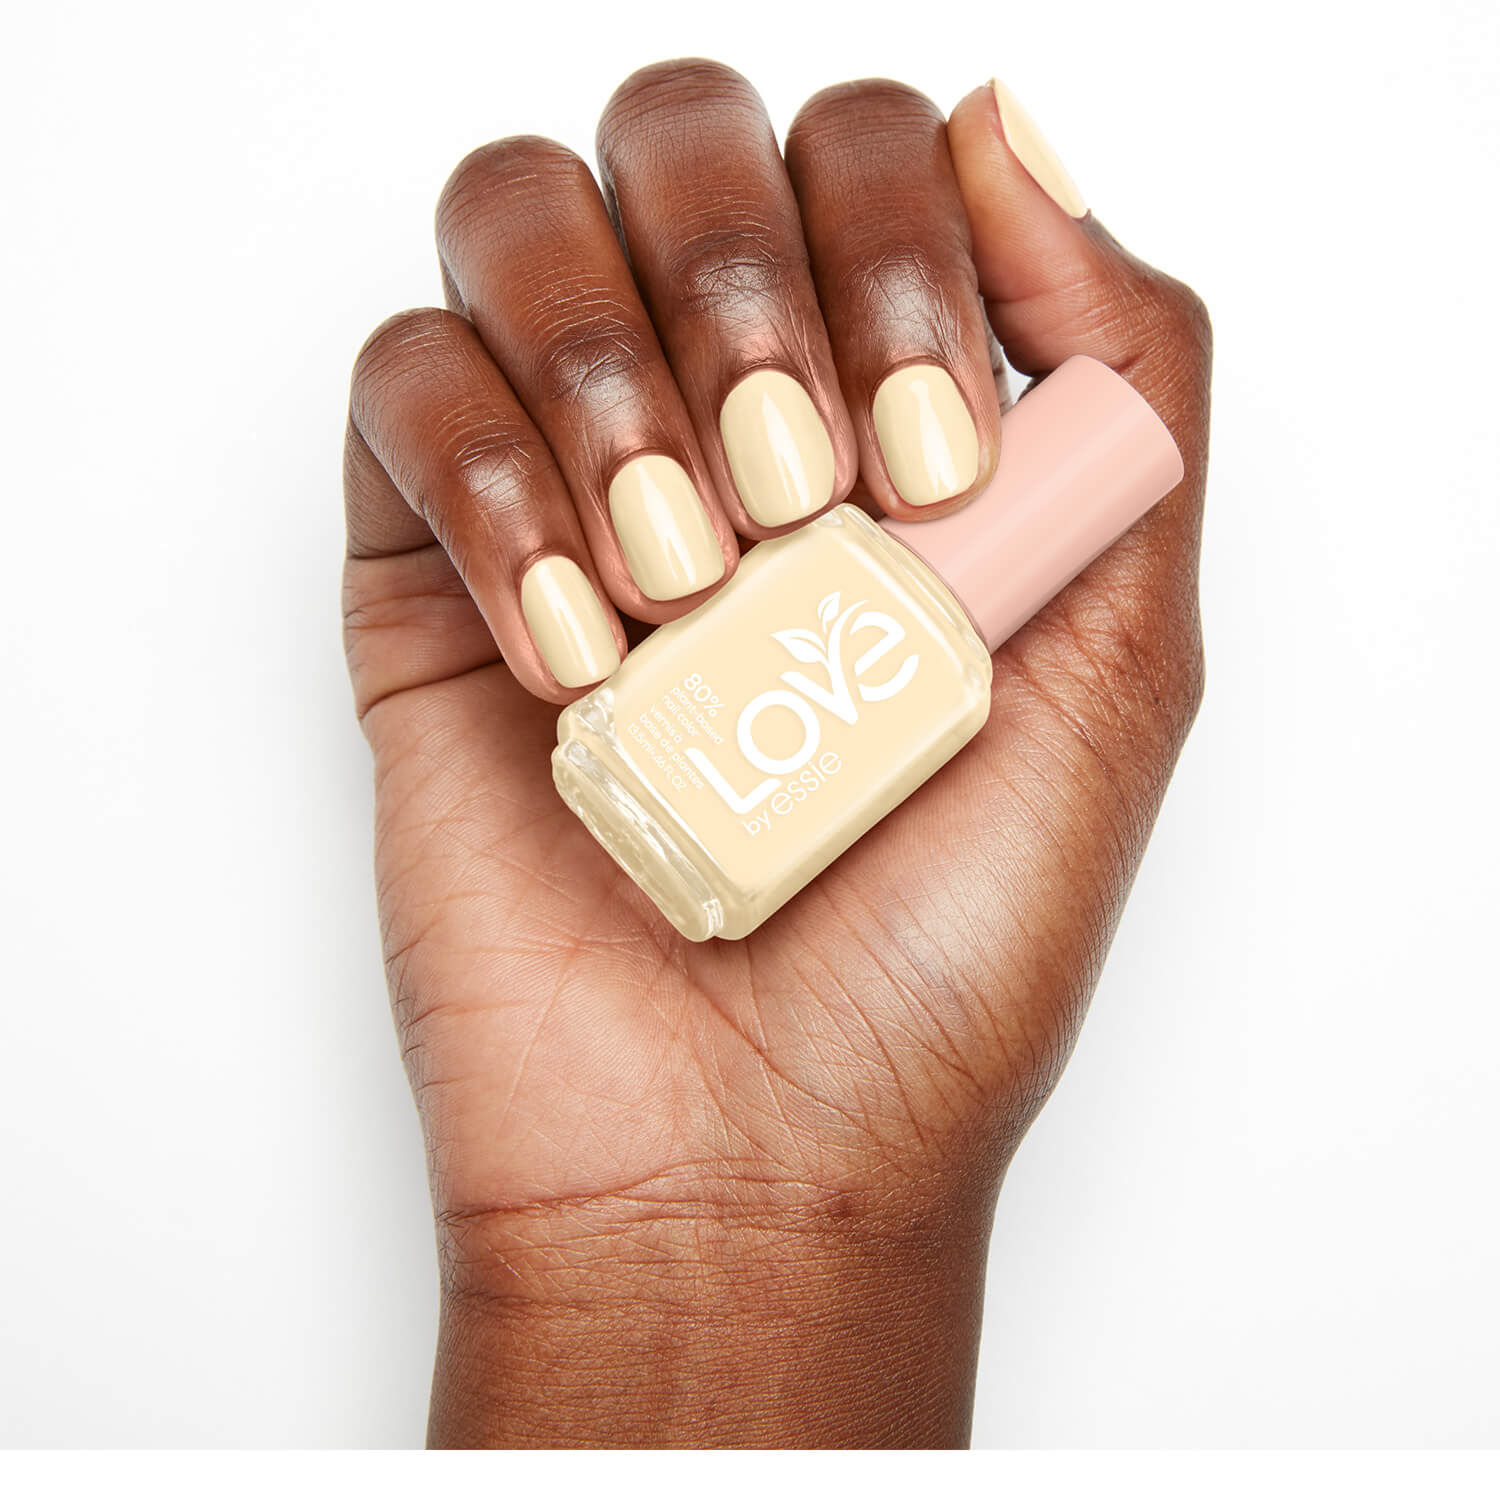 Love by 230 essie - on side the brighter